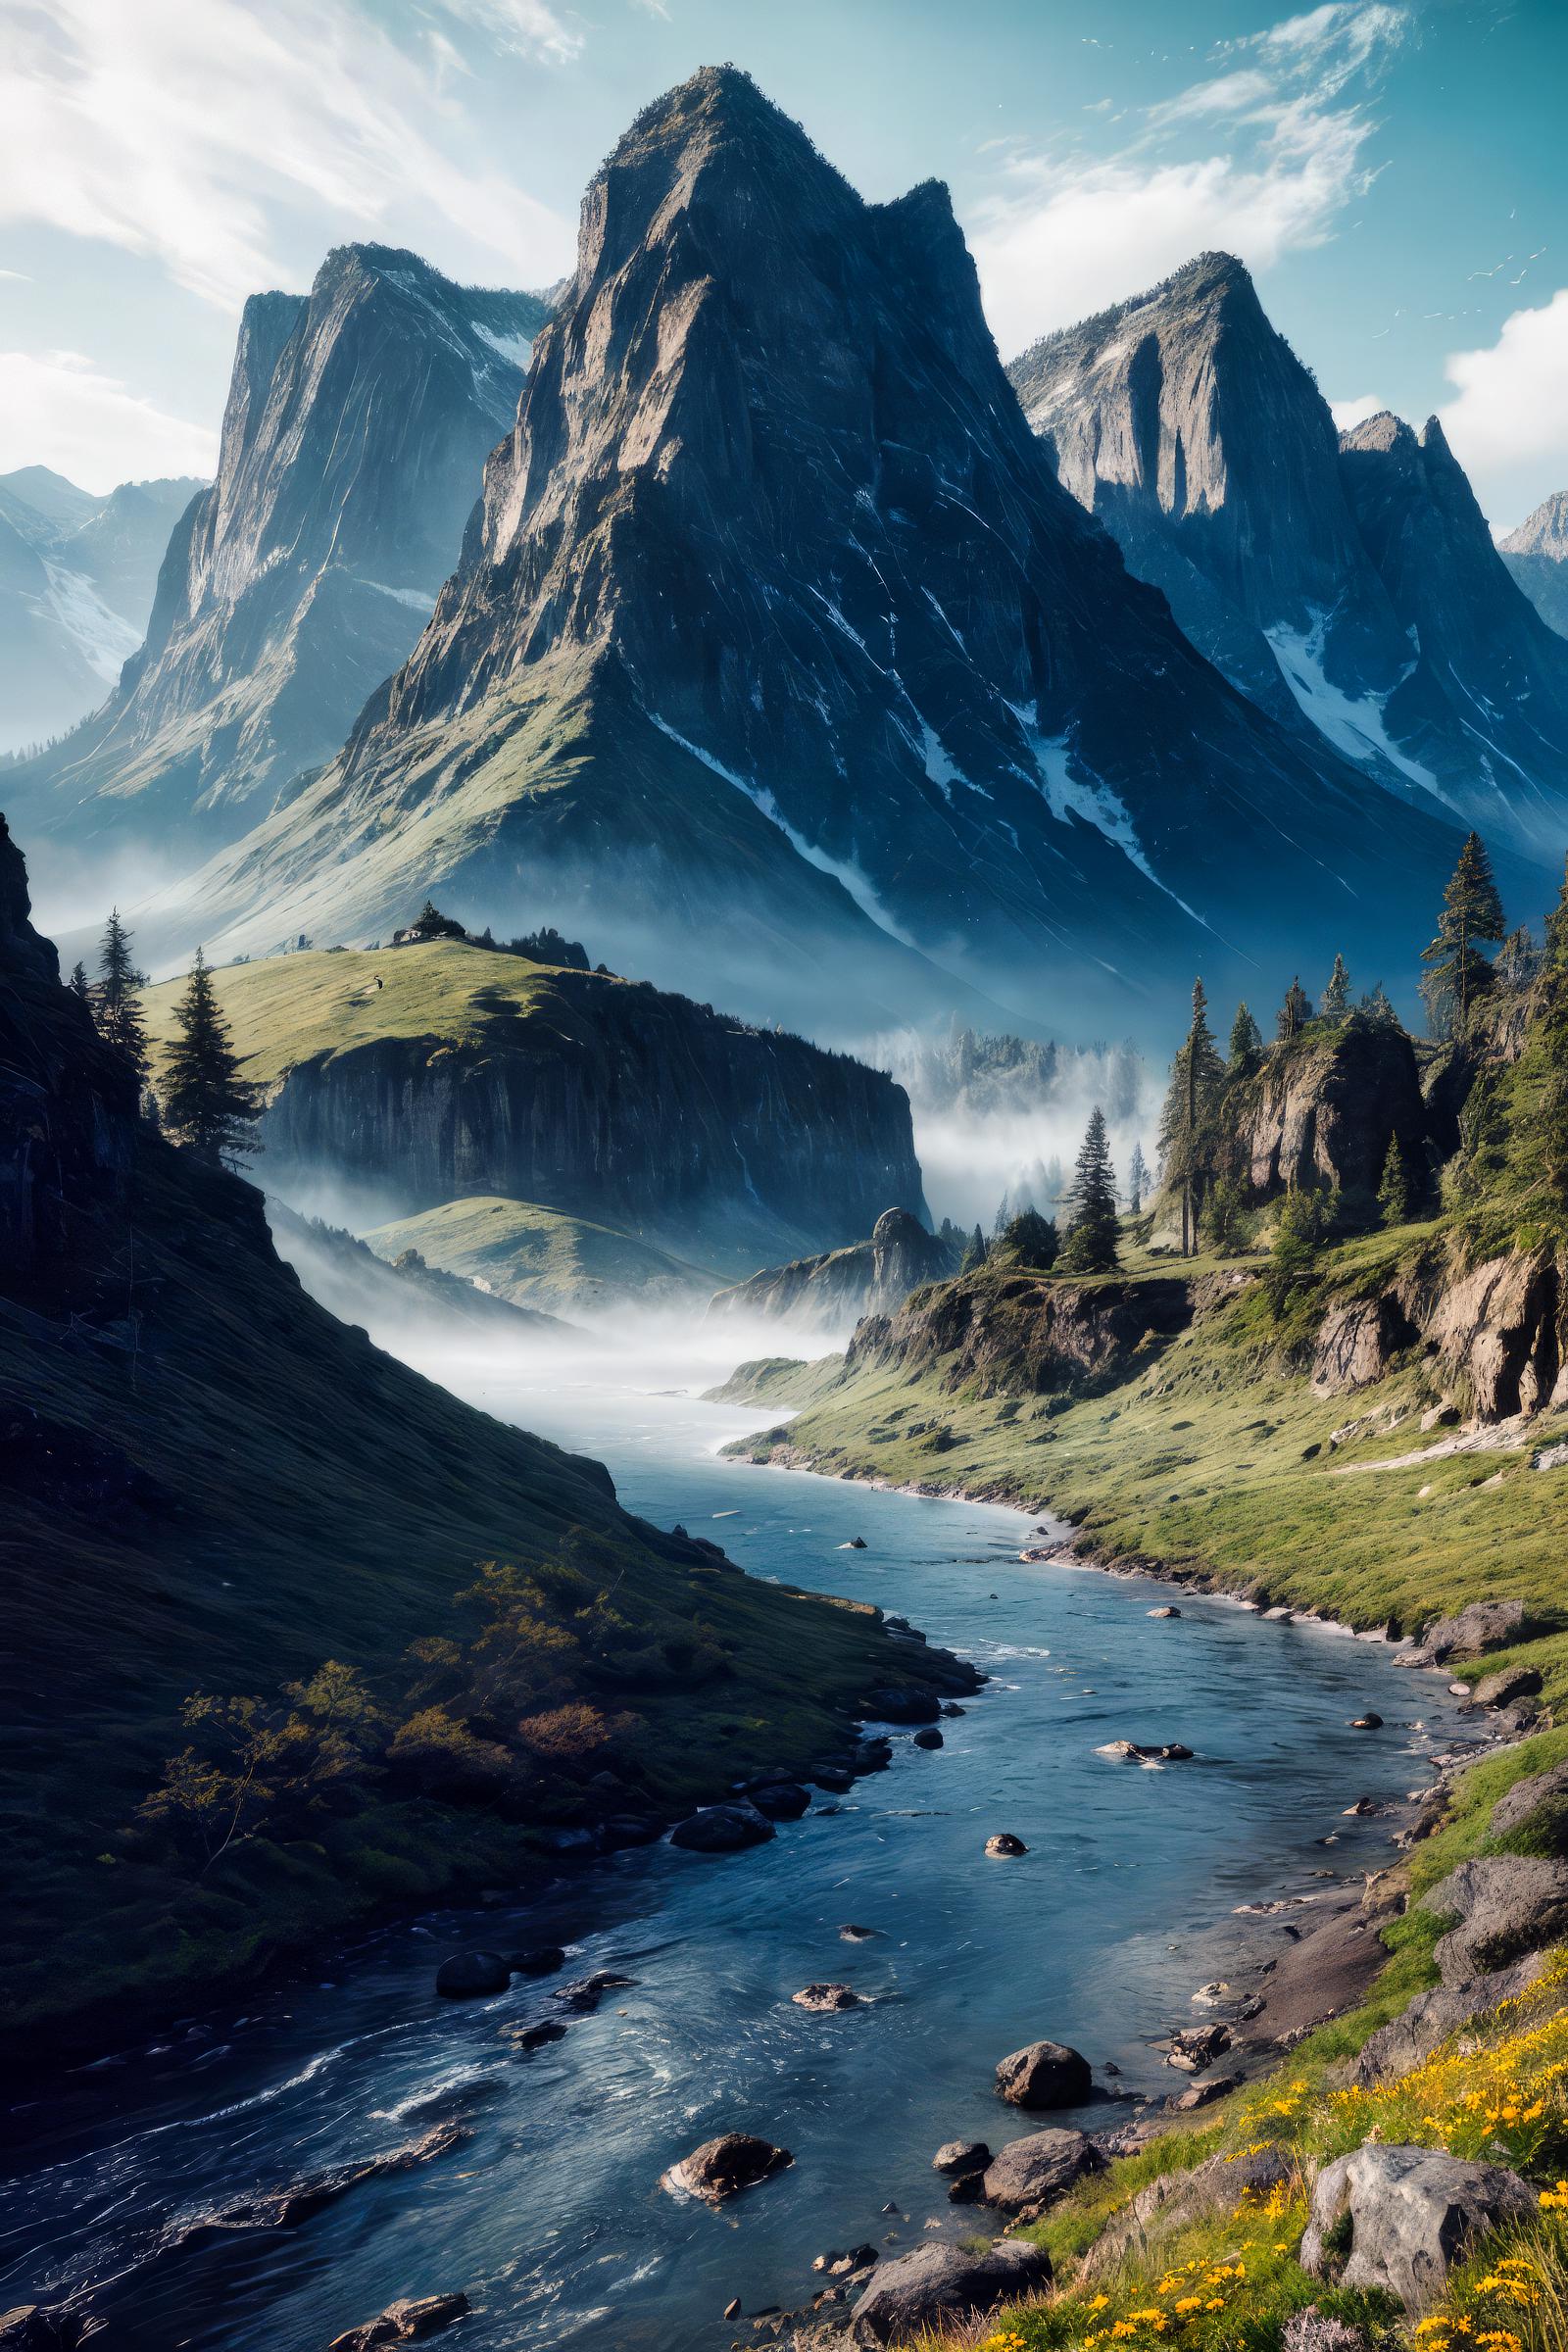 A serene mountain stream surrounded by lush greenery and a majestic mountain range in the background.